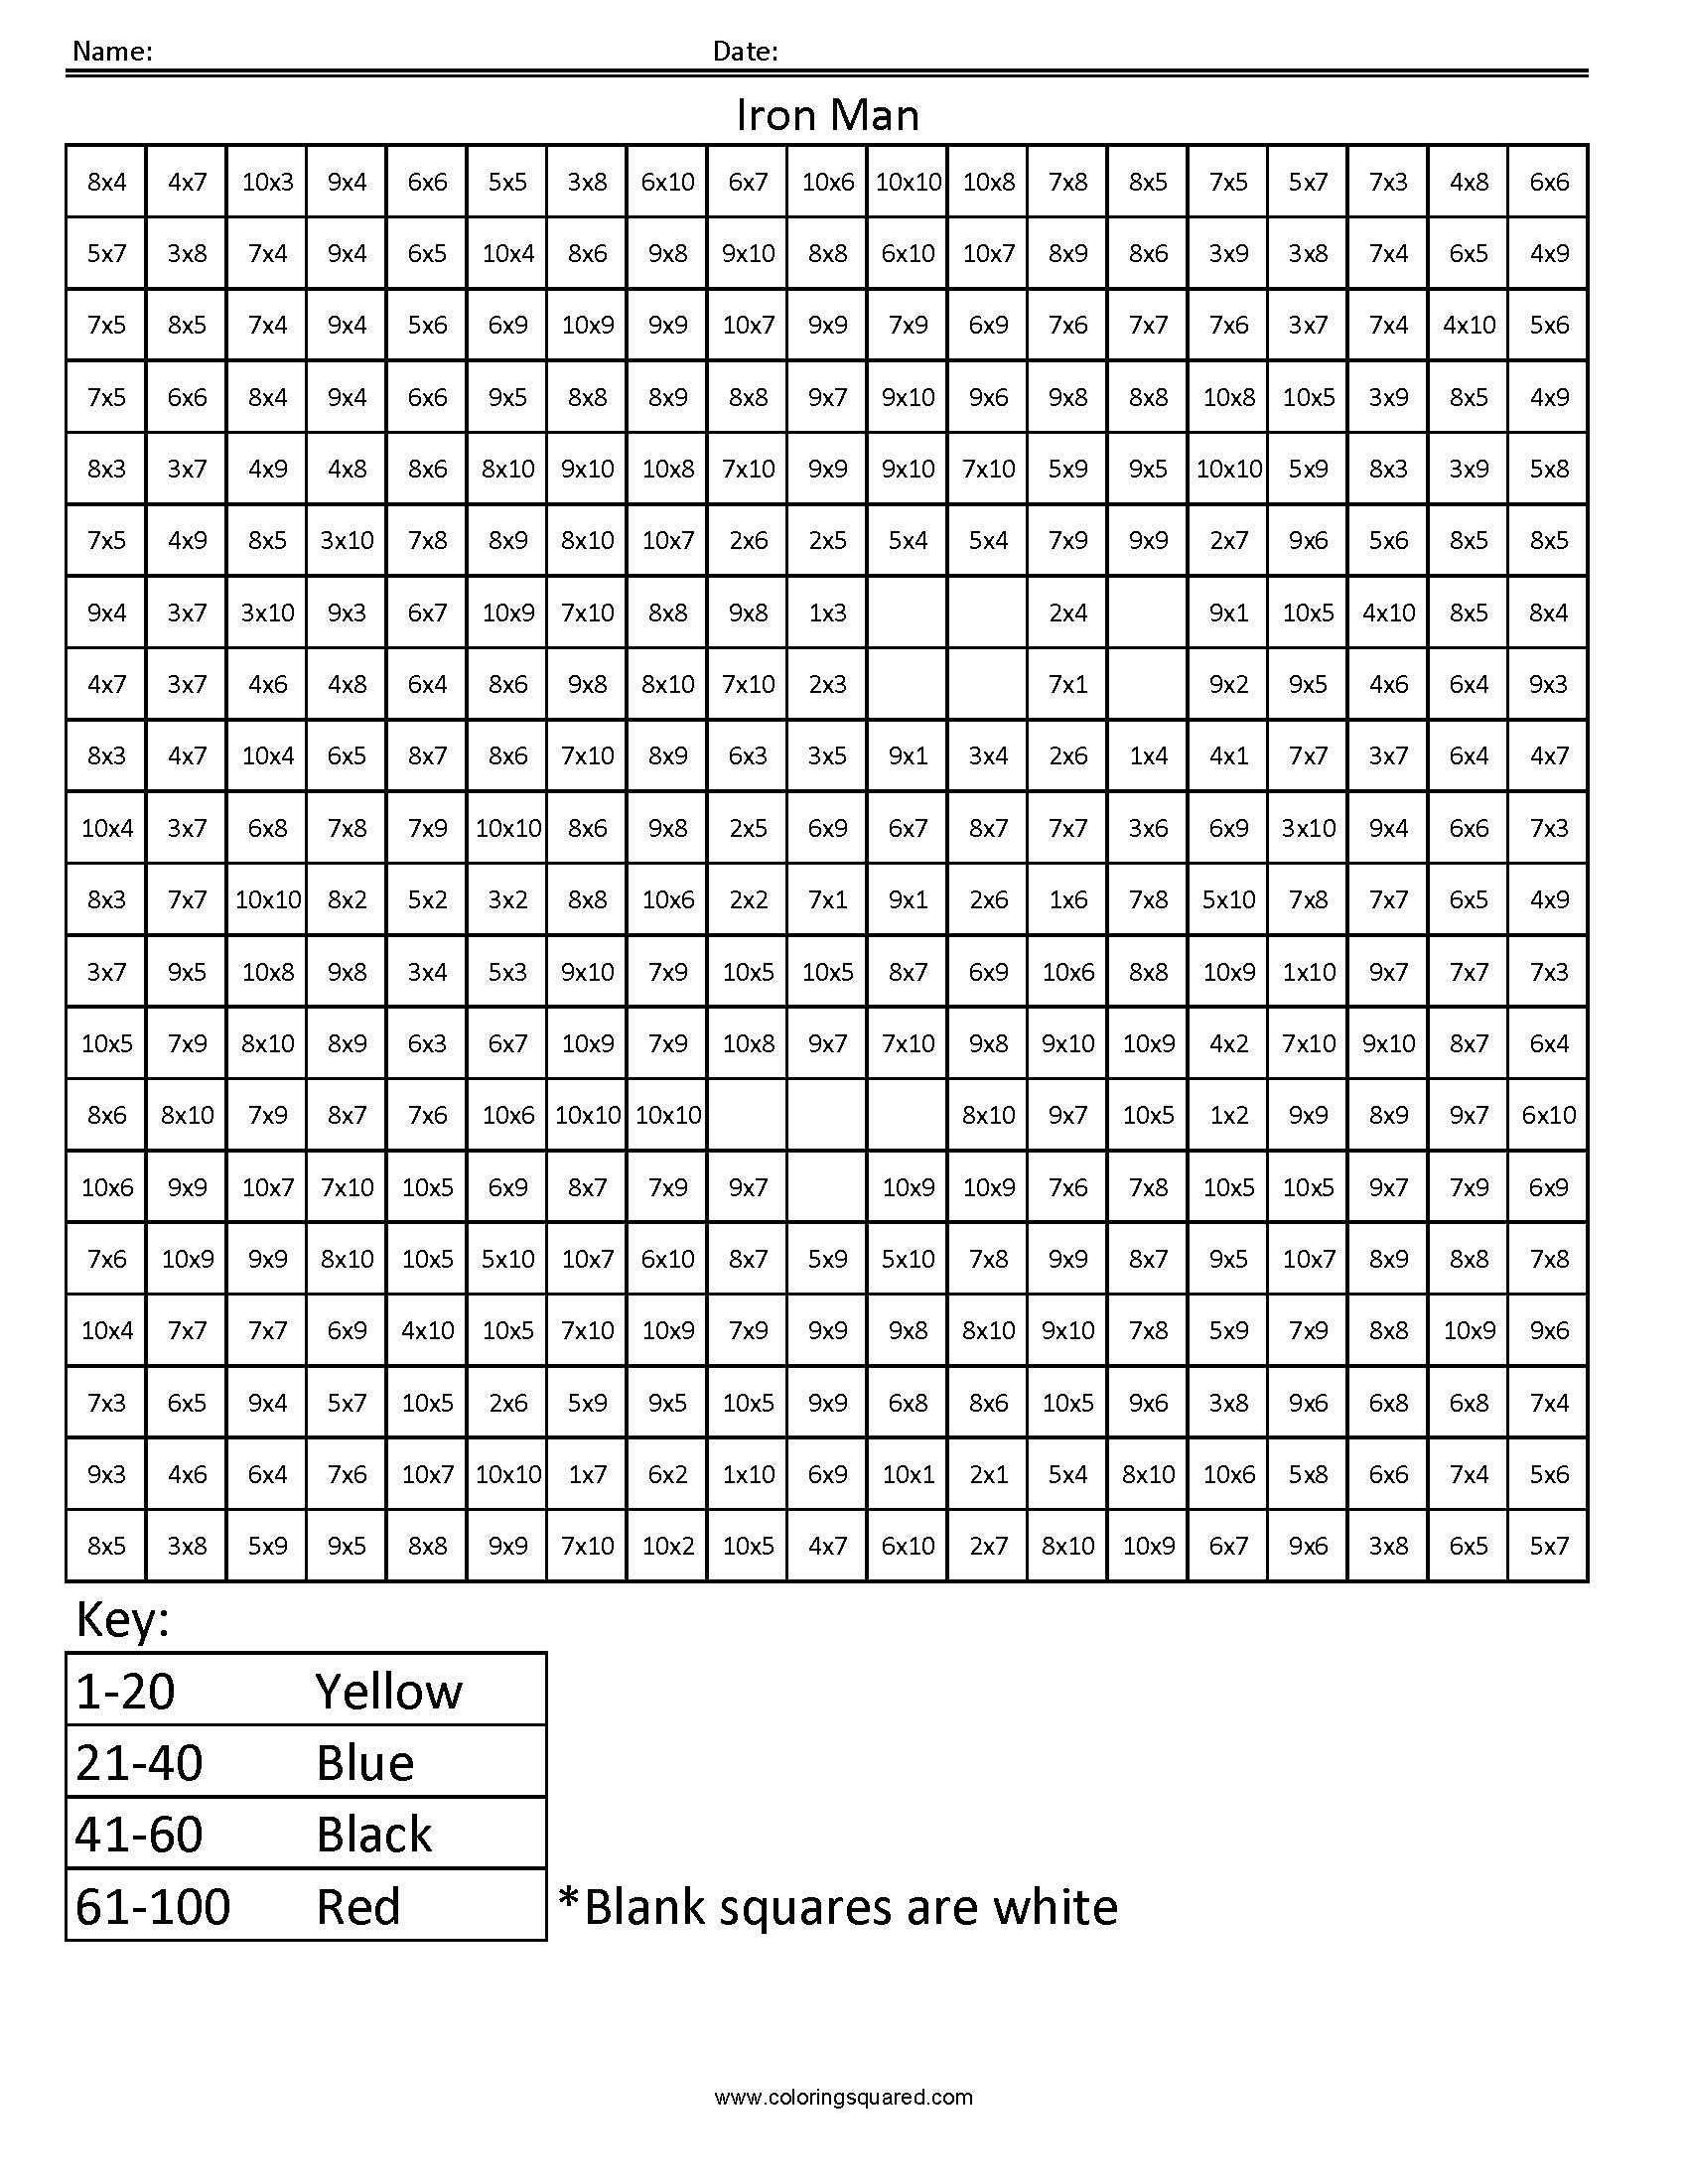 Coloring Squared Worksheets Iron Man Advanced Multiplication Coloring Squared